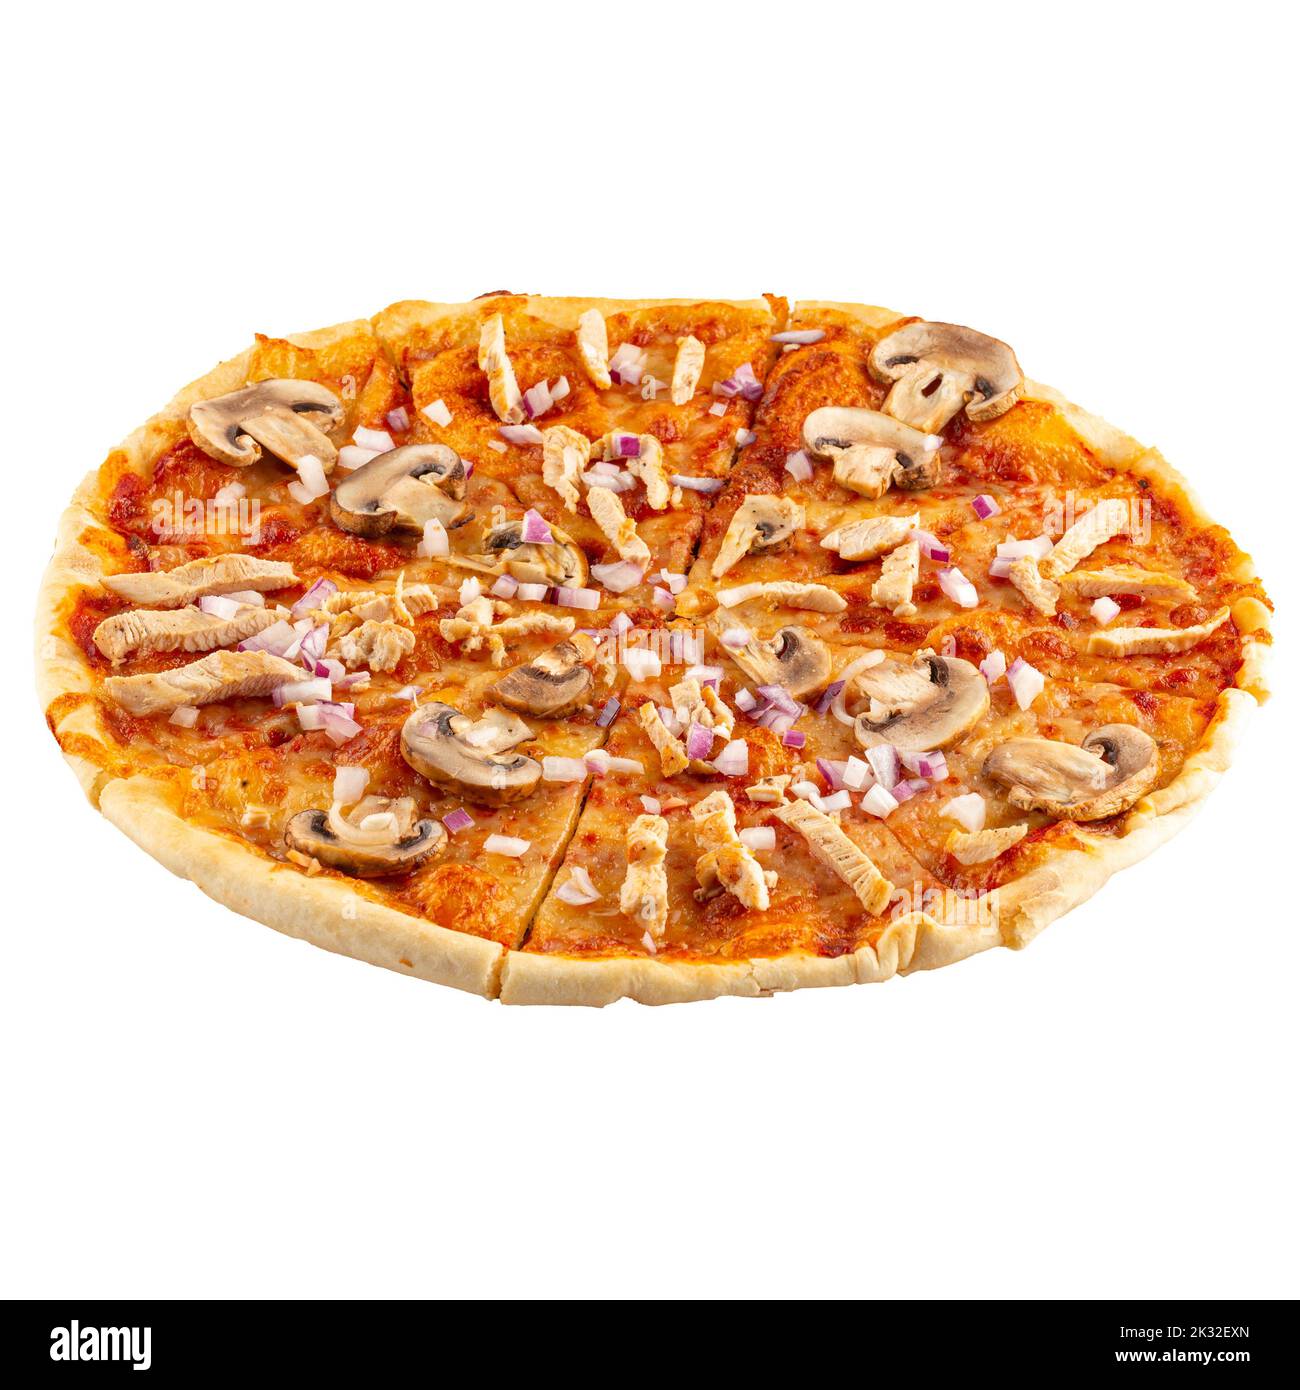 Isolated chicken and mushrooms pizza Stock Photo